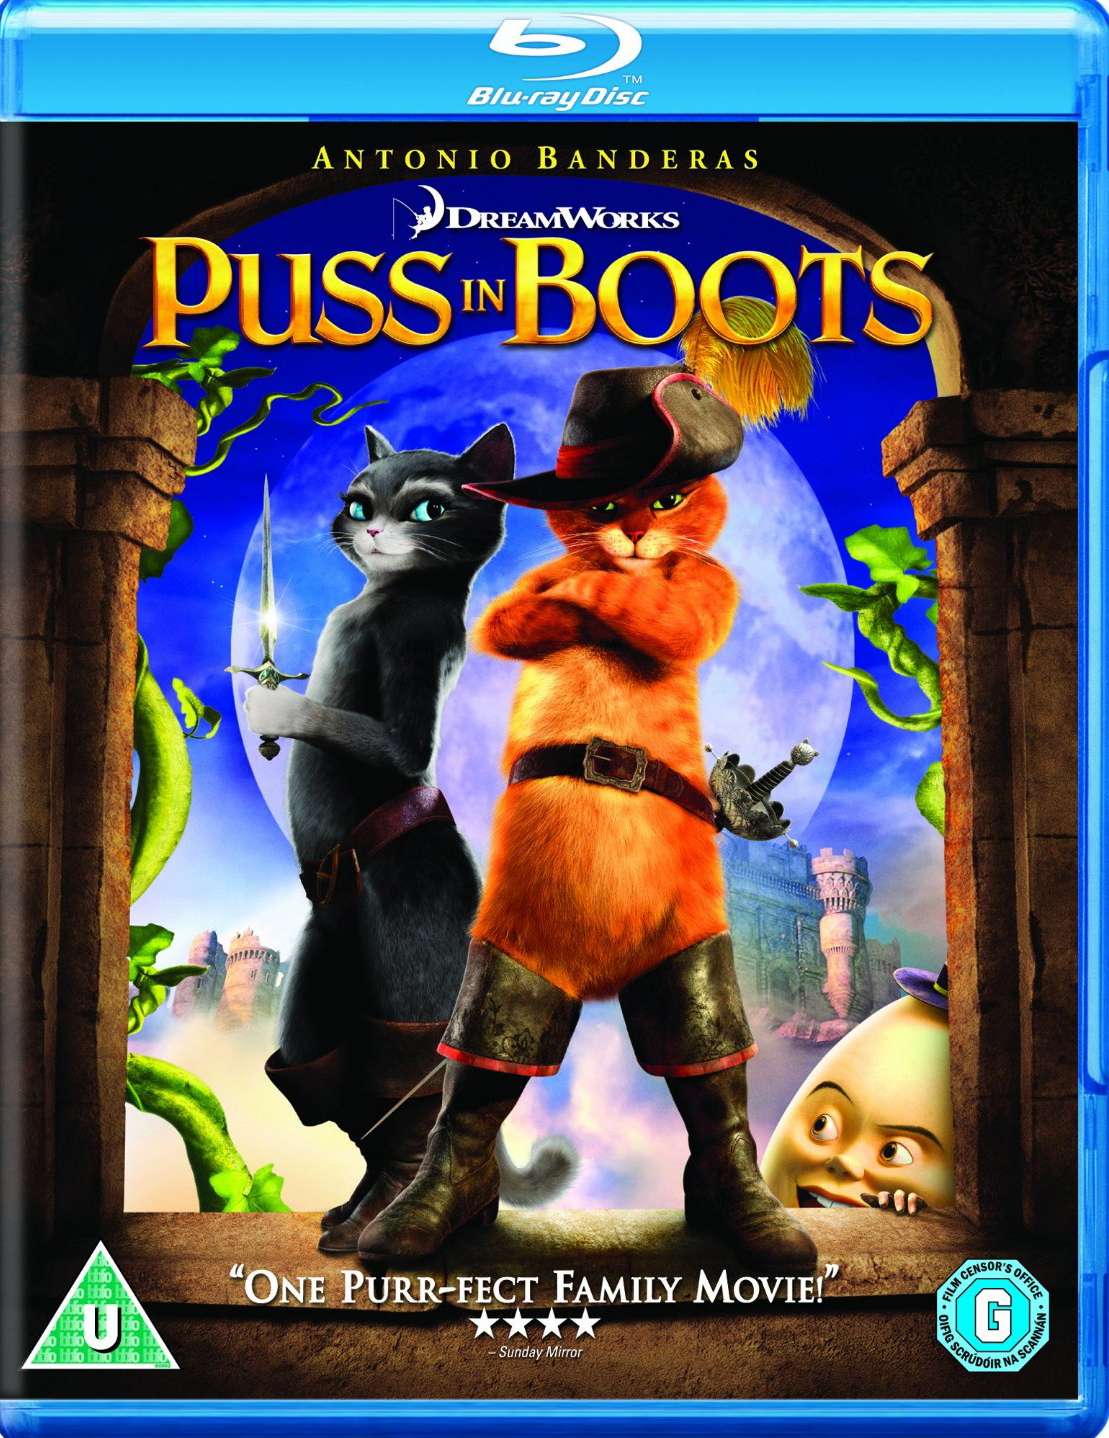 http://imageshack.us/a/img20/1038/pussinbootscover.jpg